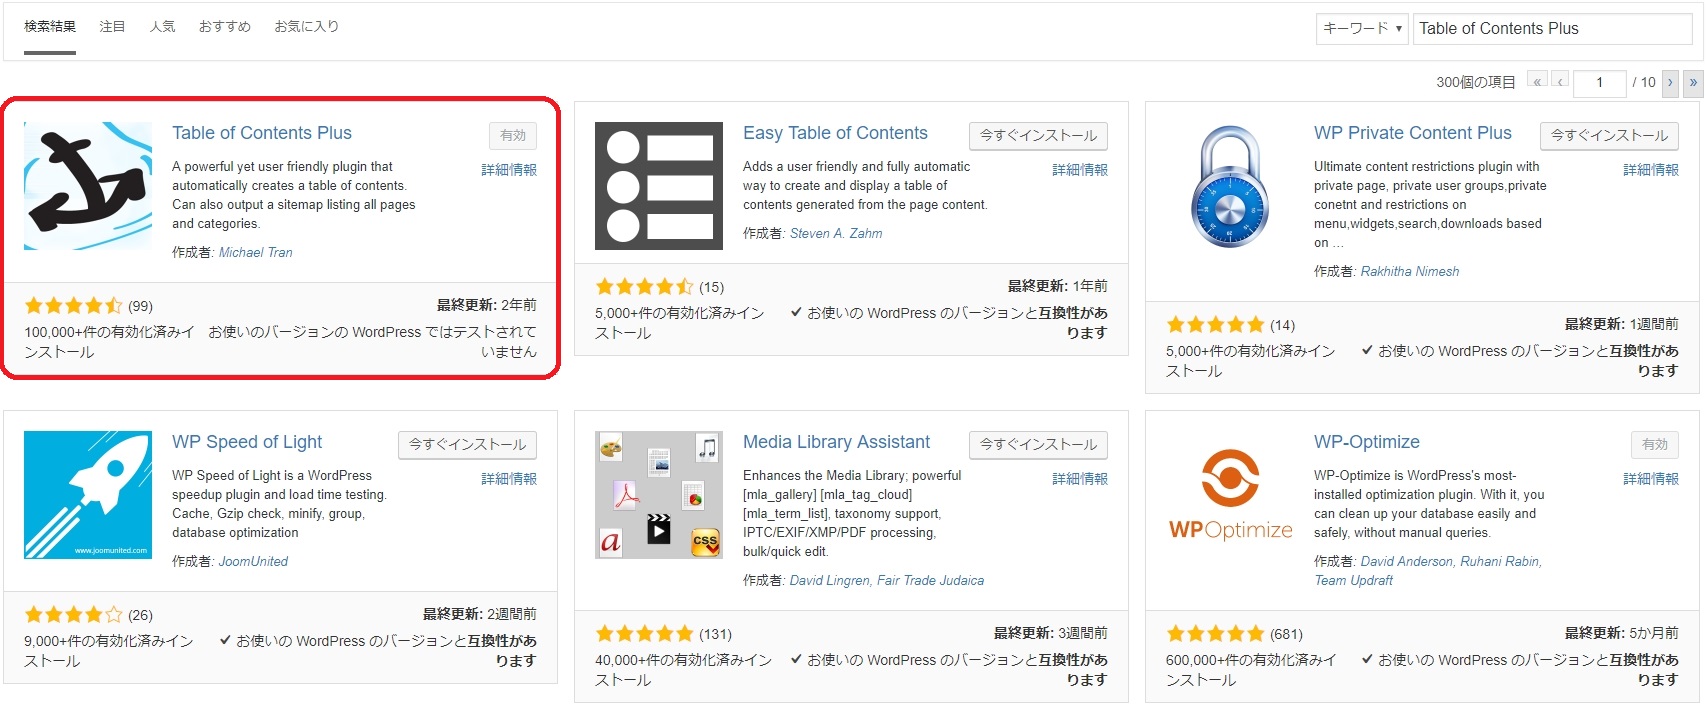 button-only@2x 目次自動表示プラグインの設定と使い方(Table of Contents Plus)